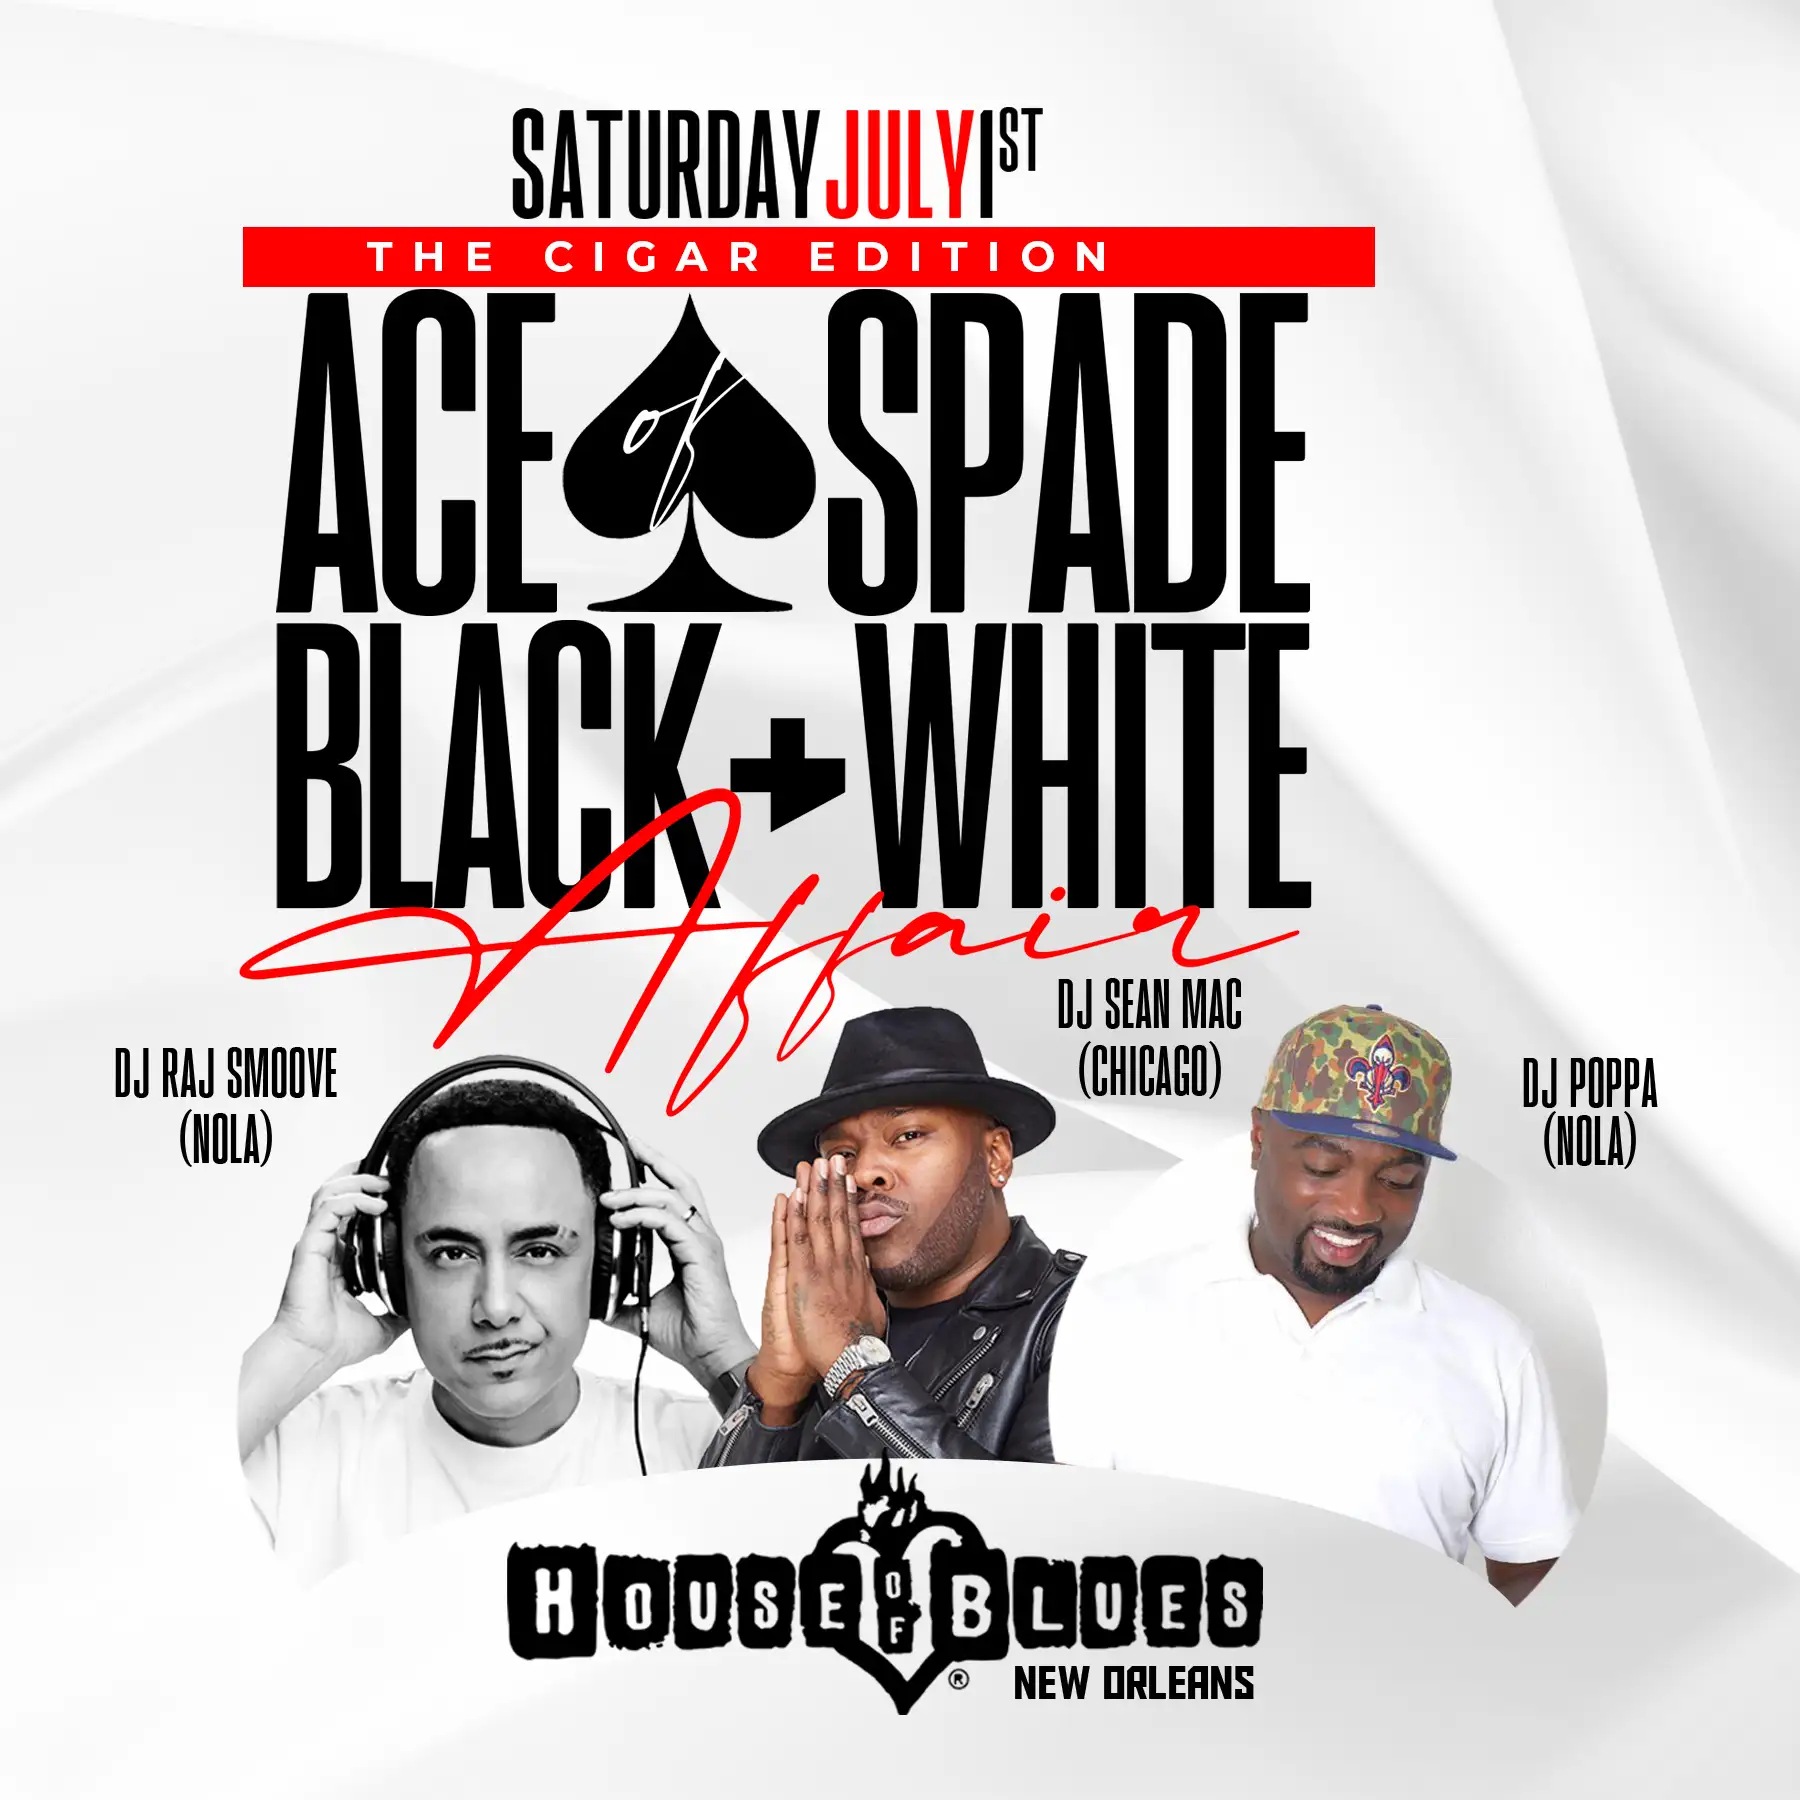 A flyer for the ace spade black and white affair.